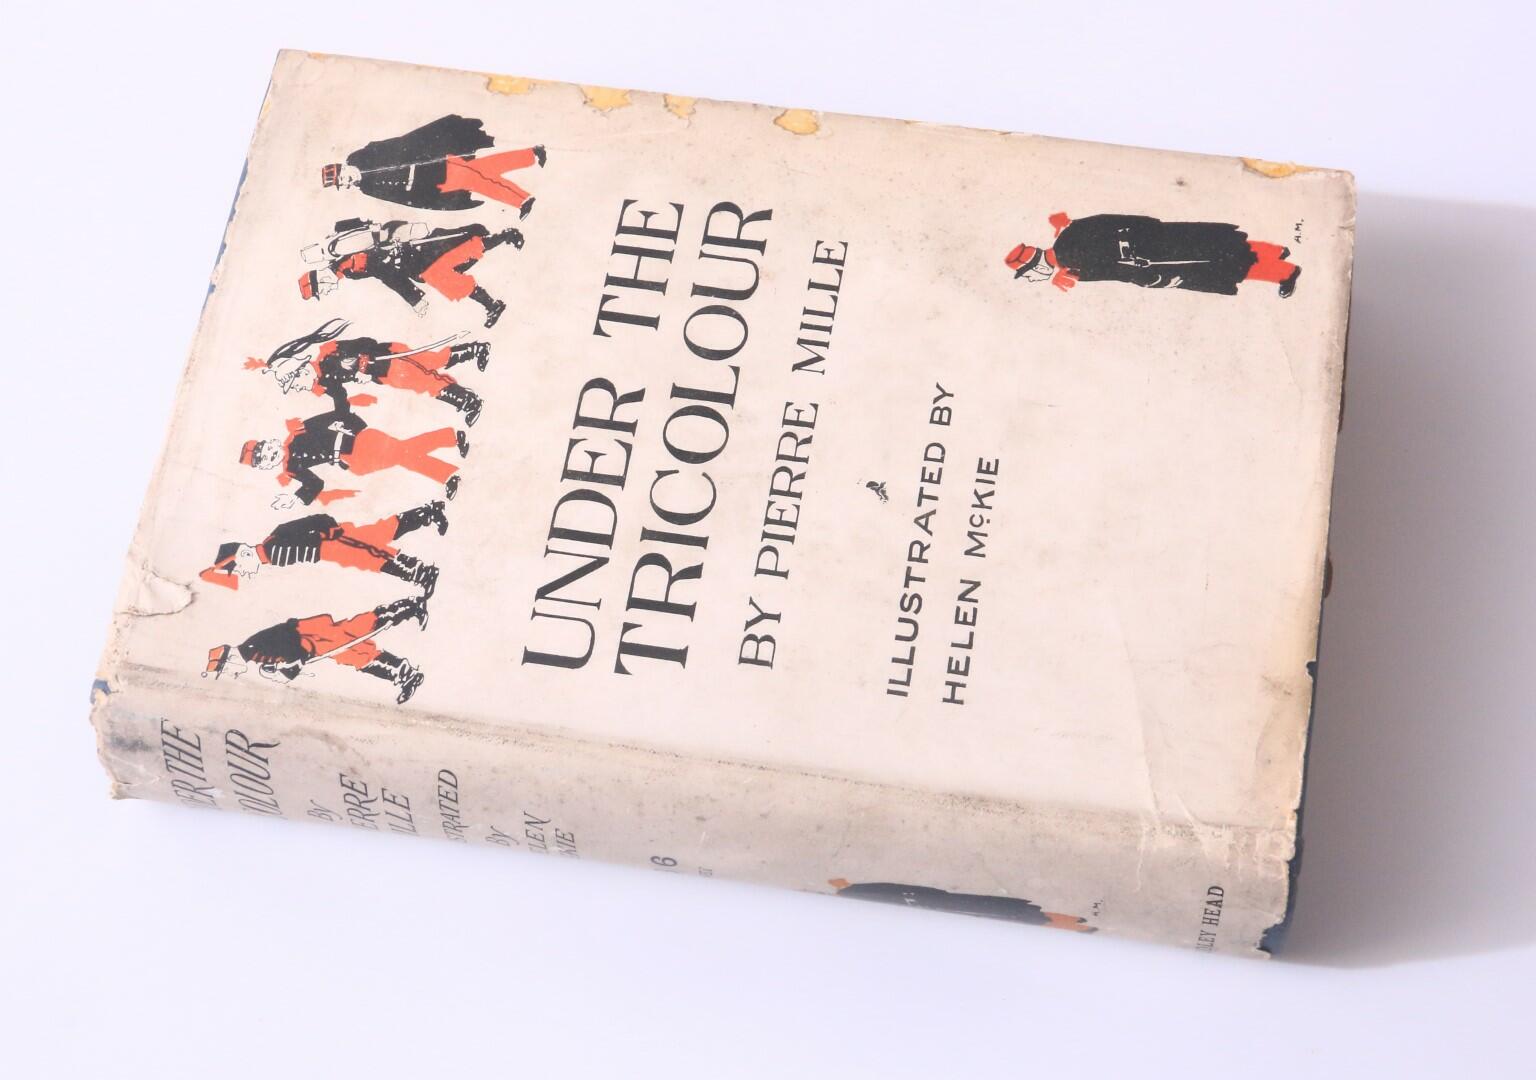 Pierre Mille - Under the Tricolour - Bodley Head, 1915, First Edition.